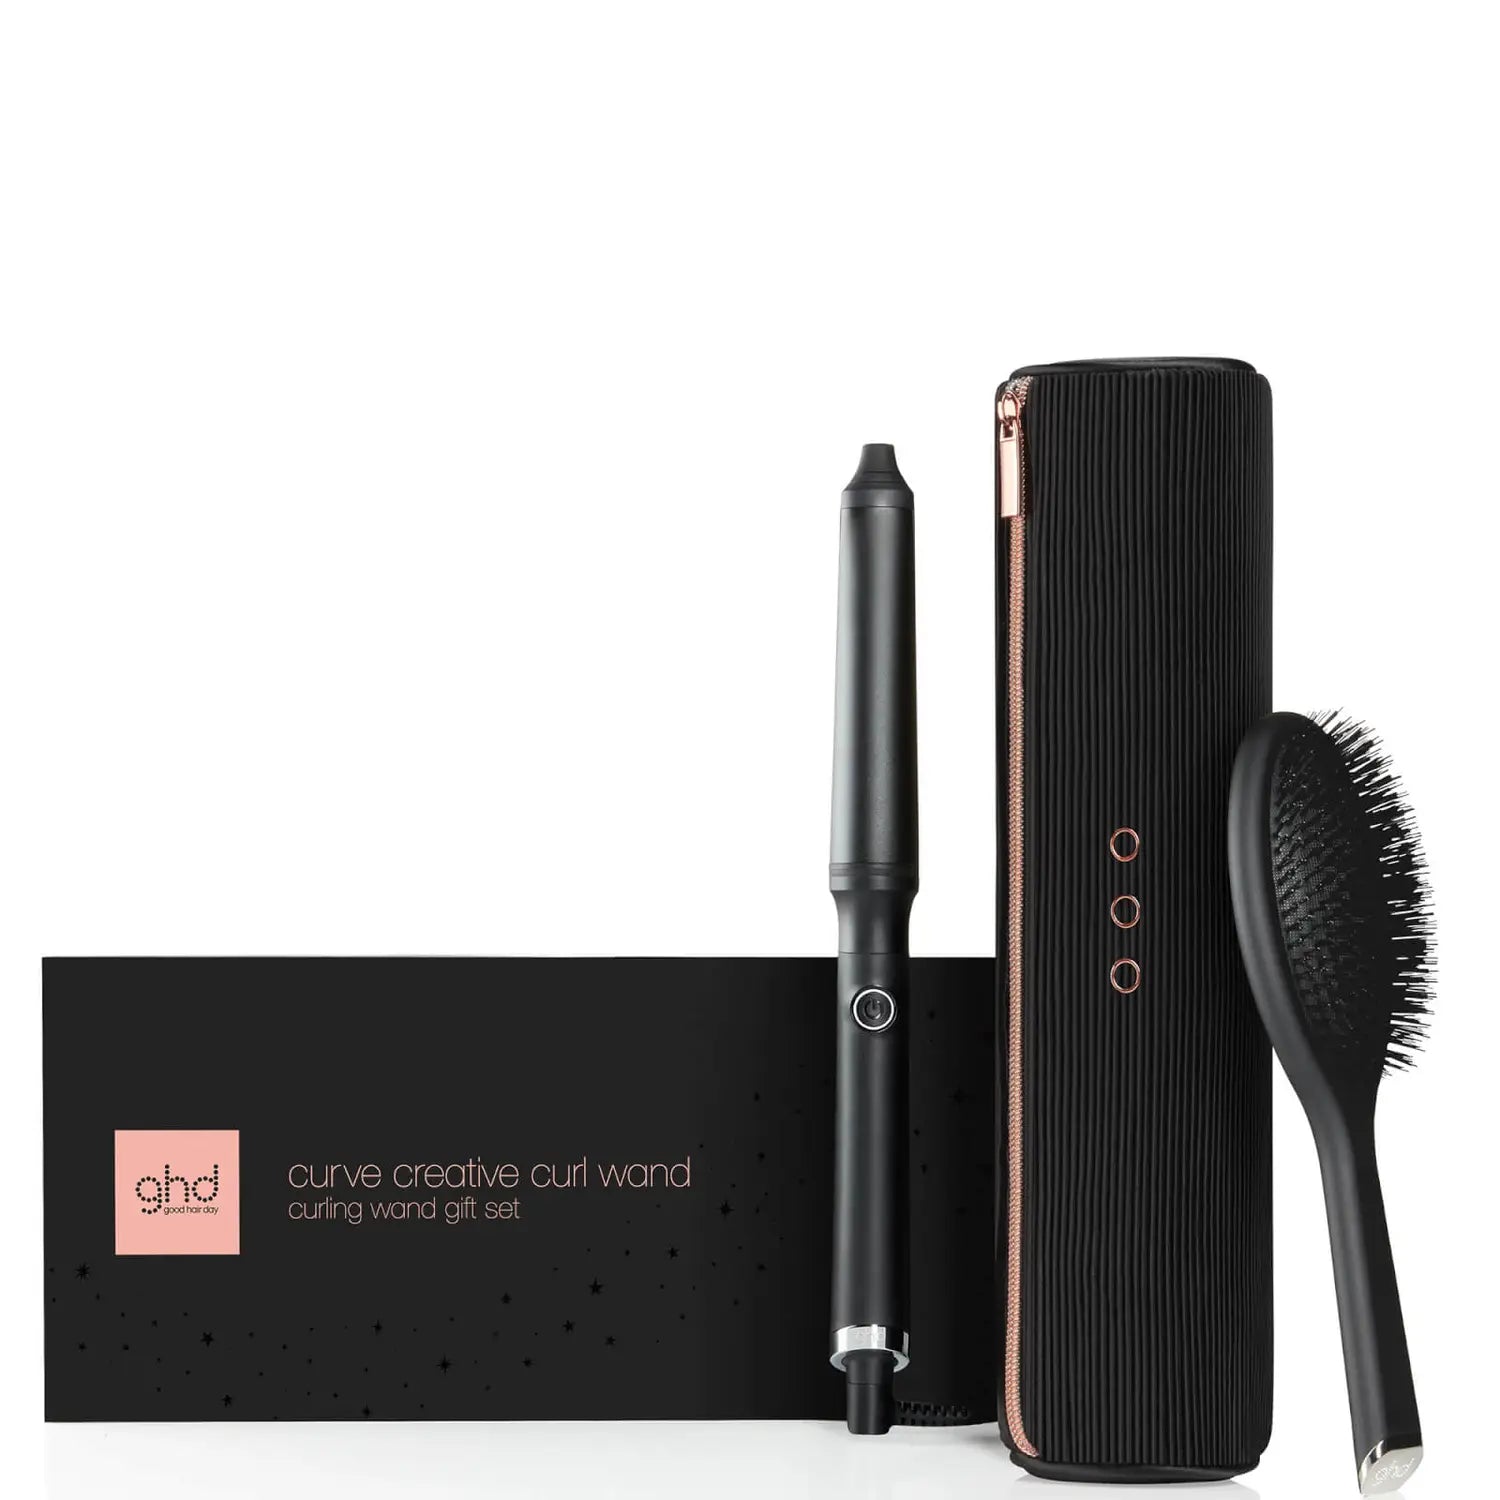 ghd Curve Creative Curl Wand Christmas Gift Set, with accessories and packaging